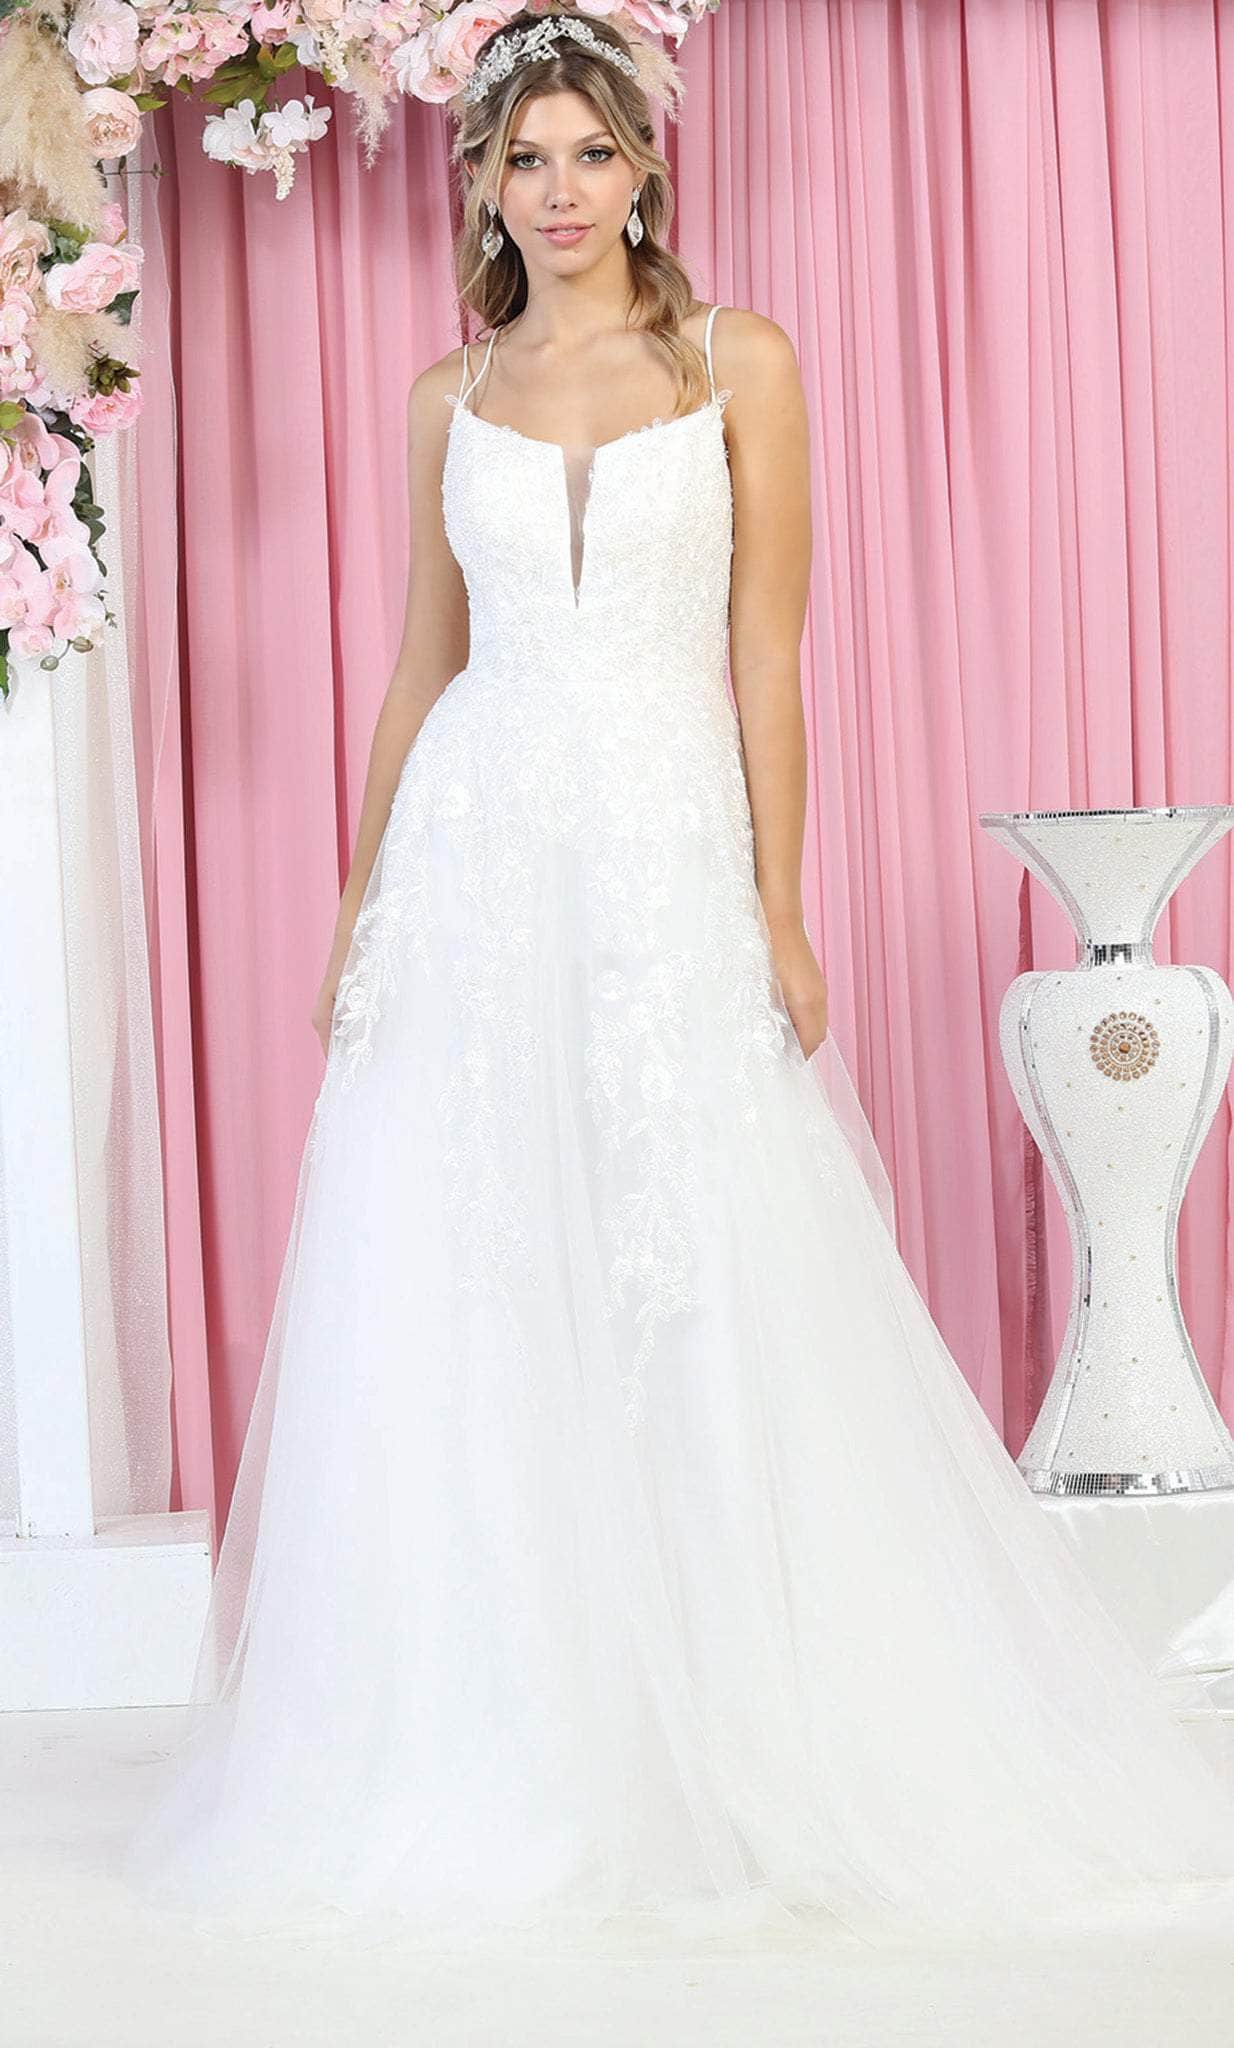 May Queen RQ7917 - Dual Strap A-Line Wedding Gown Special Occasion Dress 4 / White